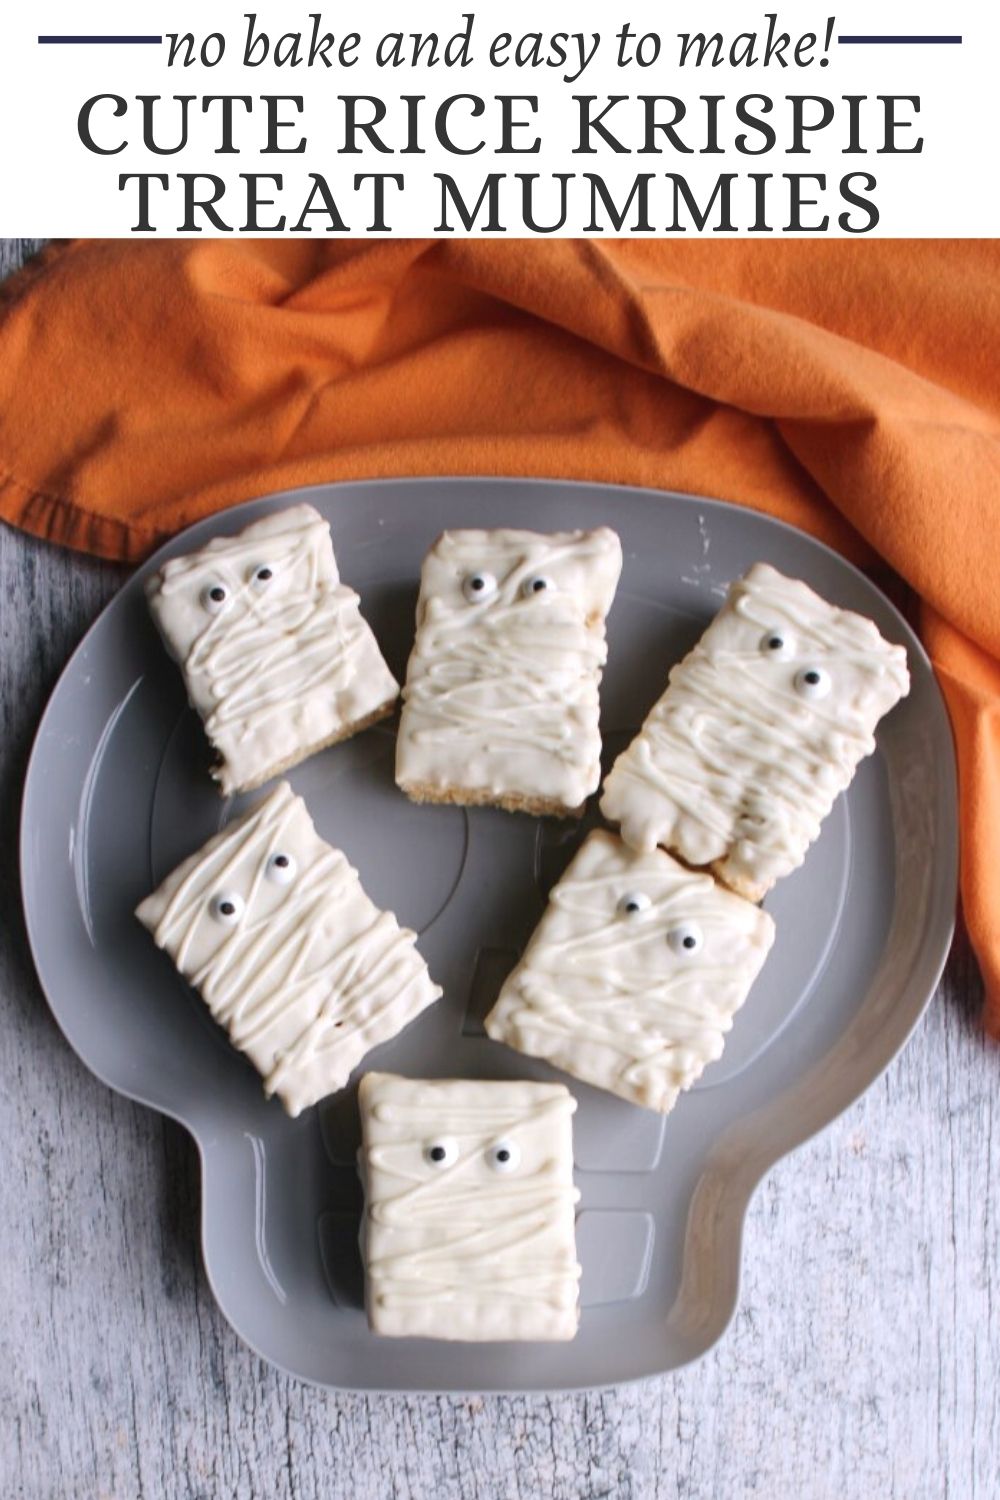 Super fun and easy to make mummy rice crispy treats are cute for Halloween party treats. Plus the kids can help make them!